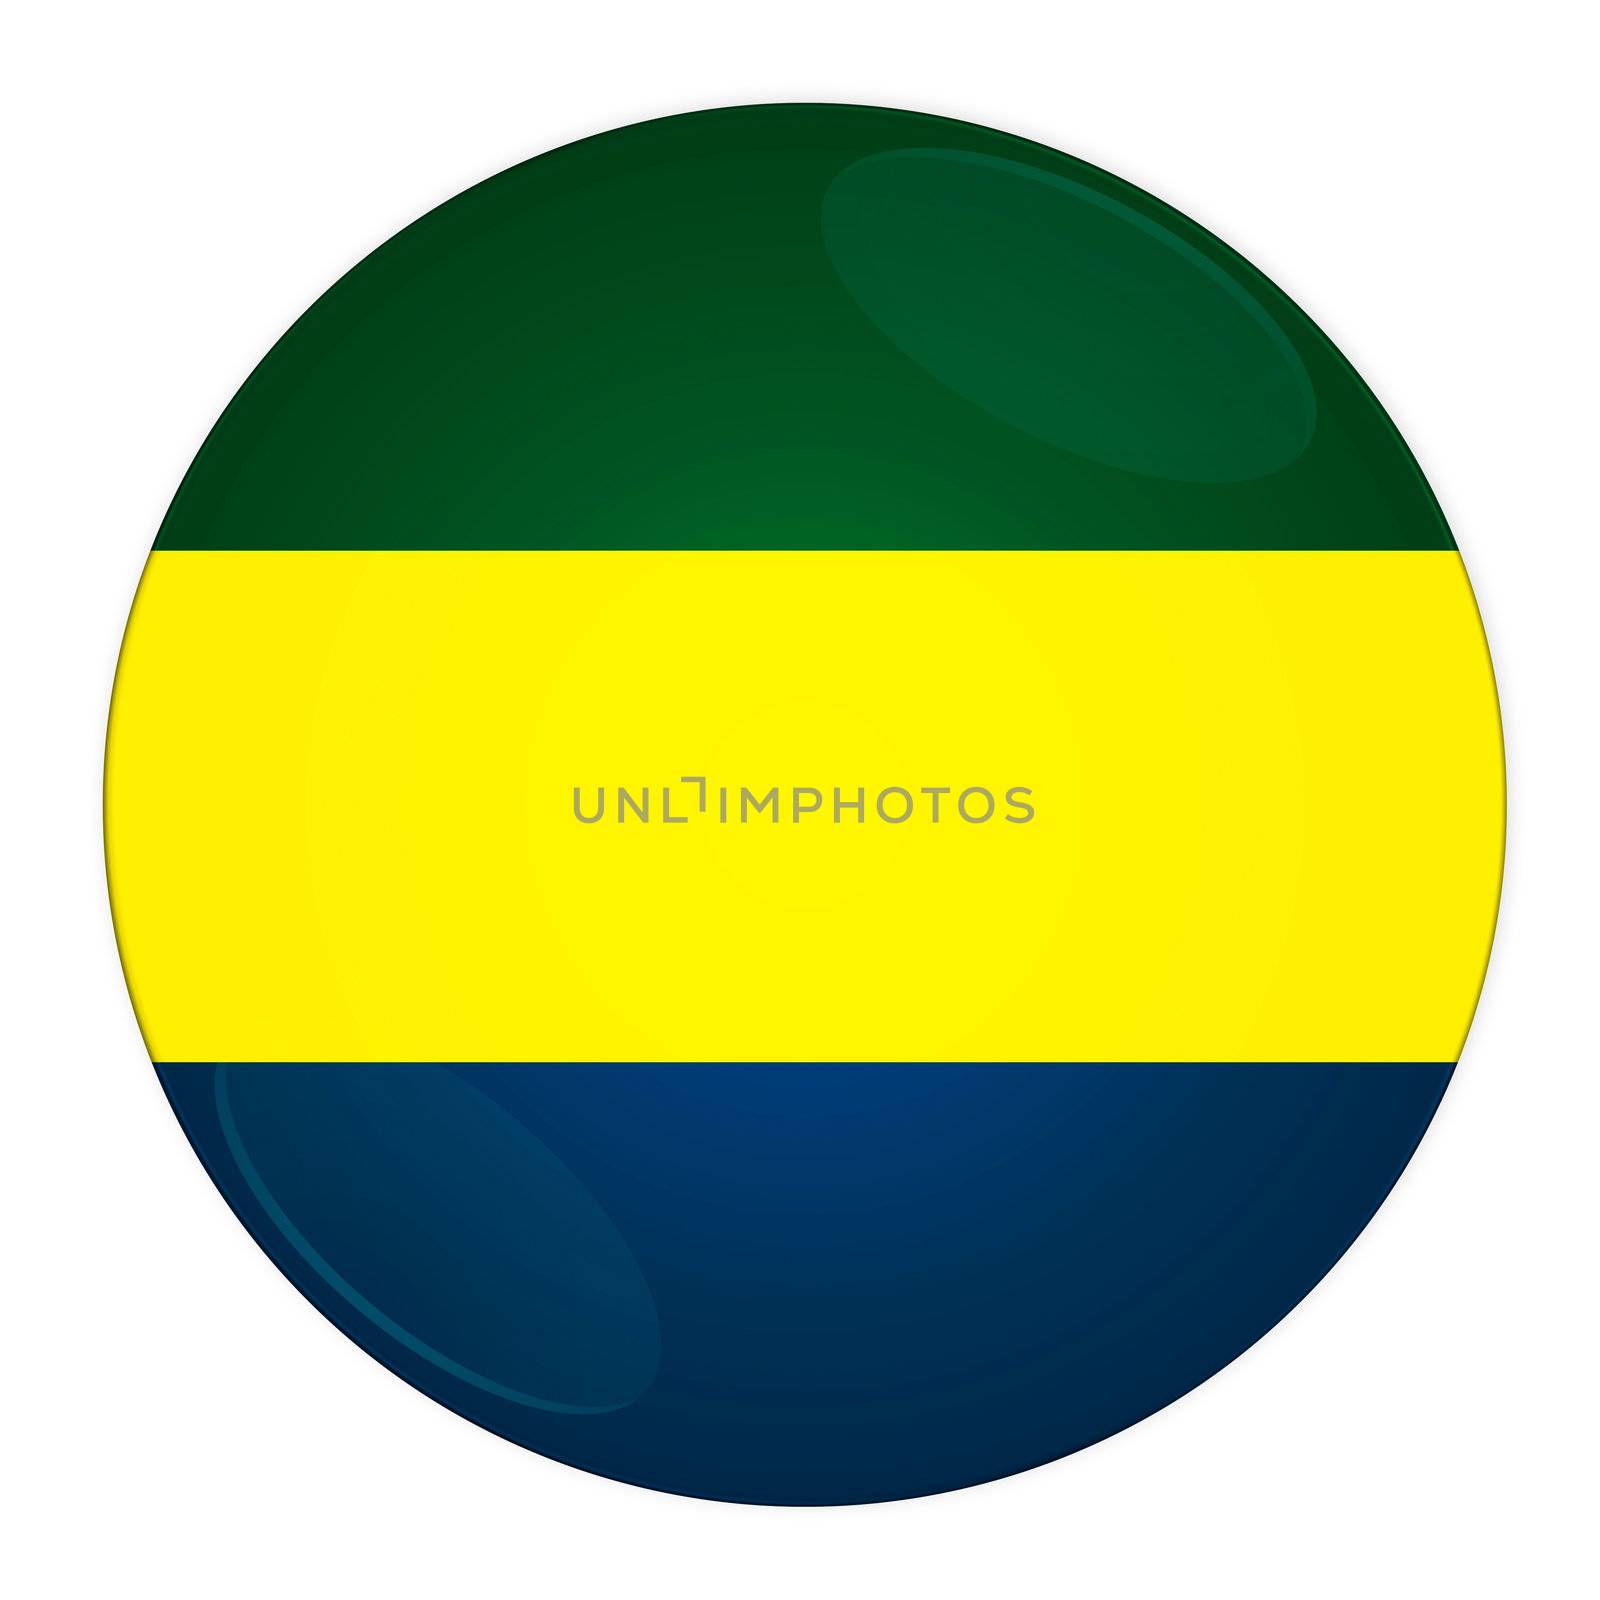 Abstract illustration: button with flag from Gabon country